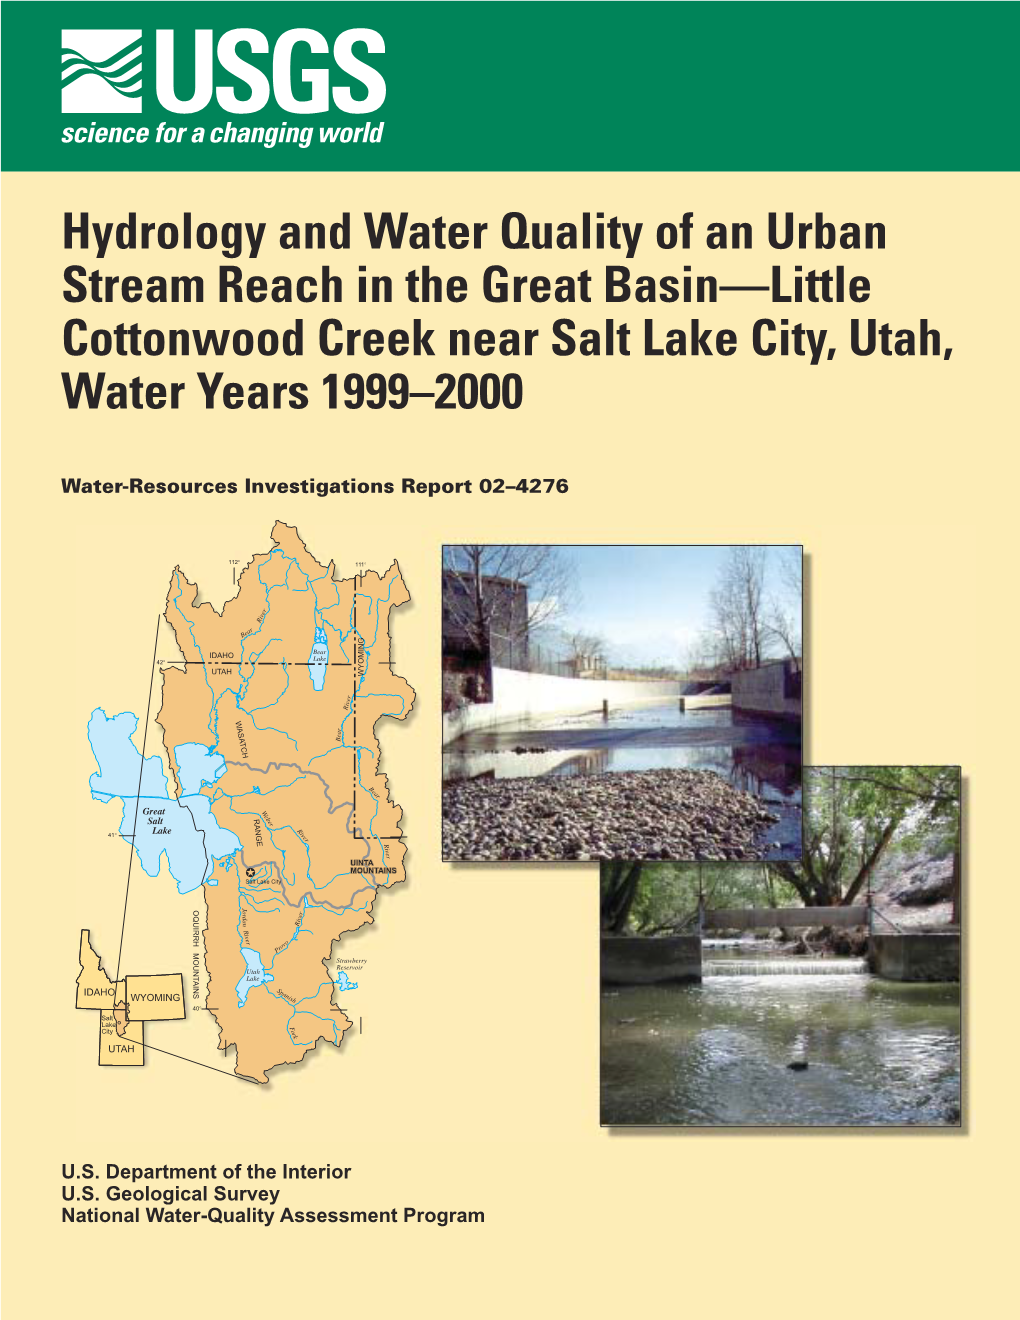 Hydrology and Water Quality of an Urban Stream Reach in the Great Basin—Little Cottonwood Creek Near Salt Lake City, Utah, Water Years 1999–2000